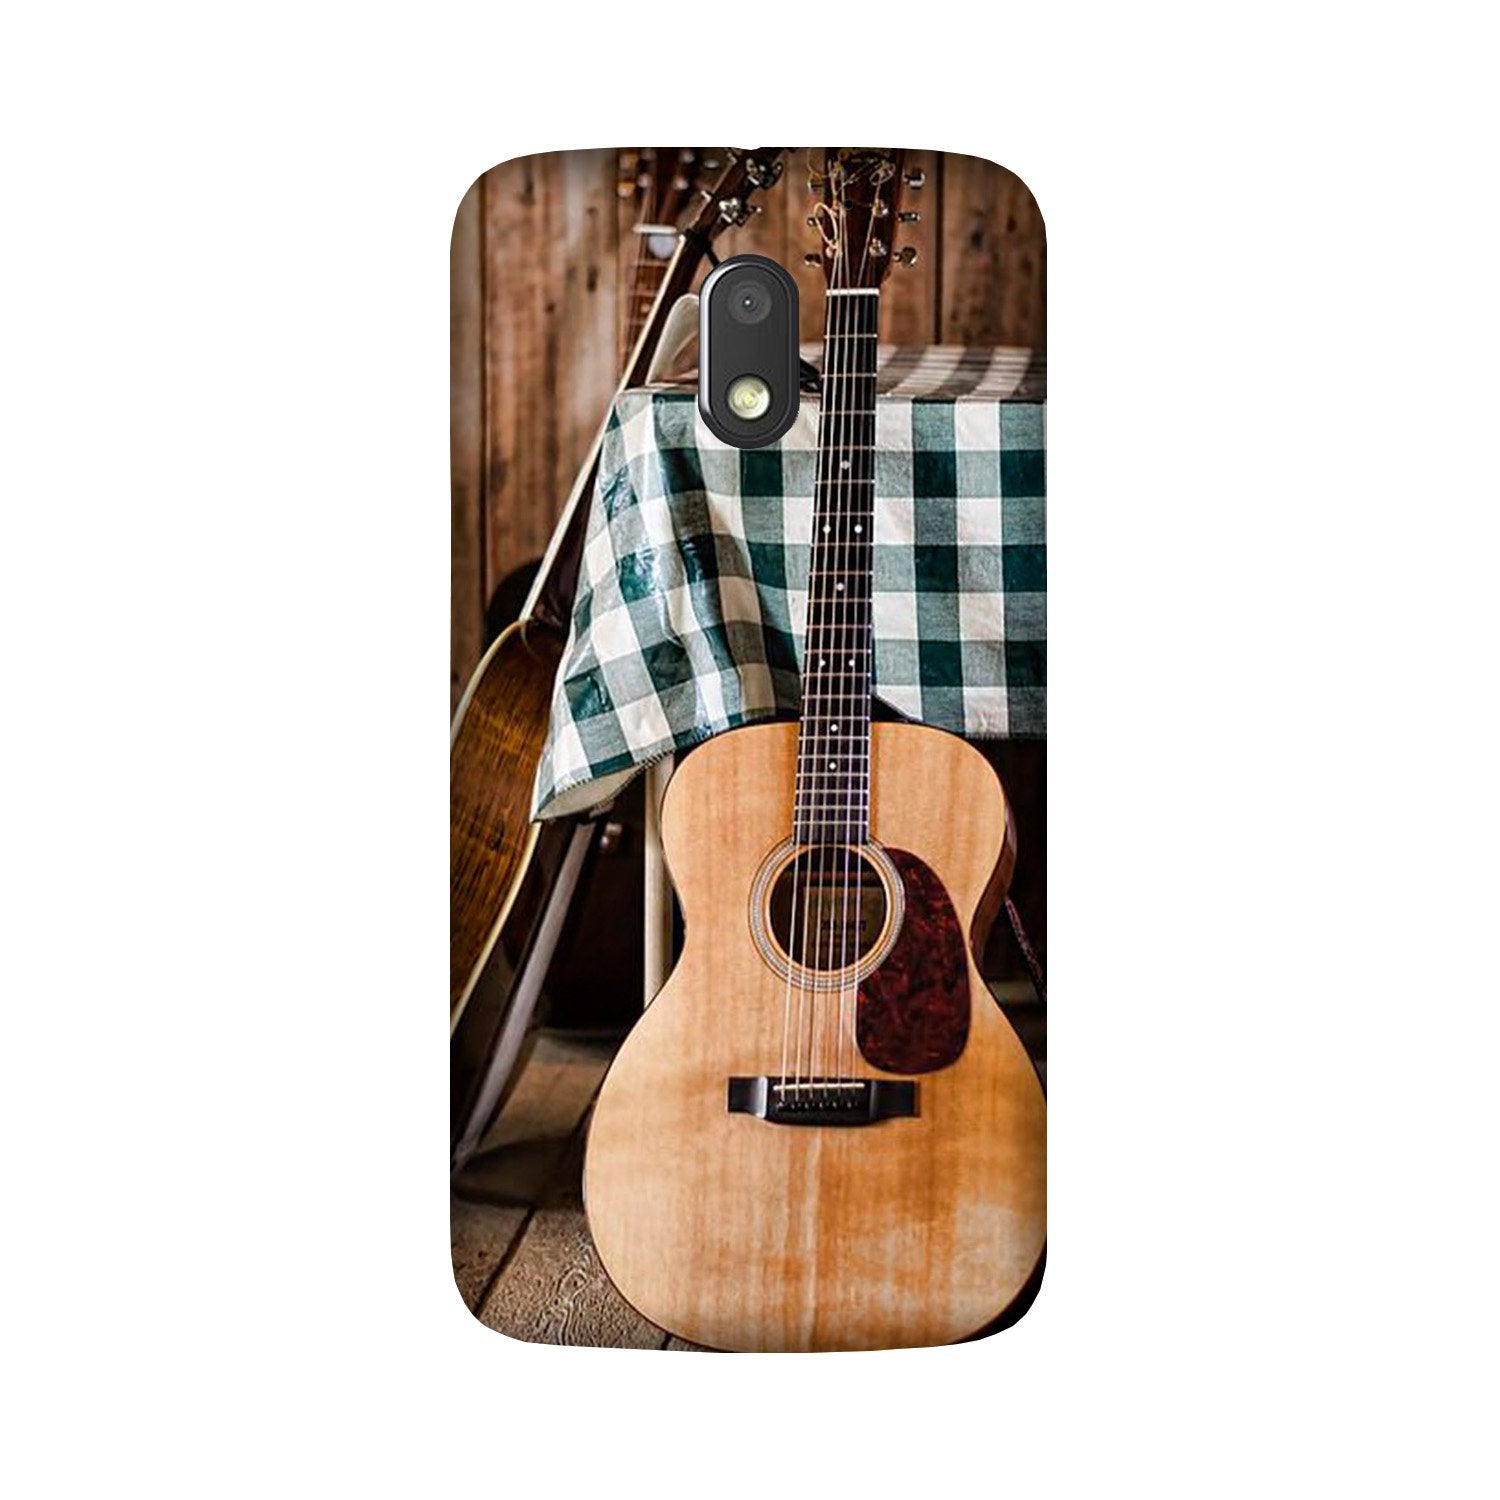 Guitar2 Case for Moto G4 Play